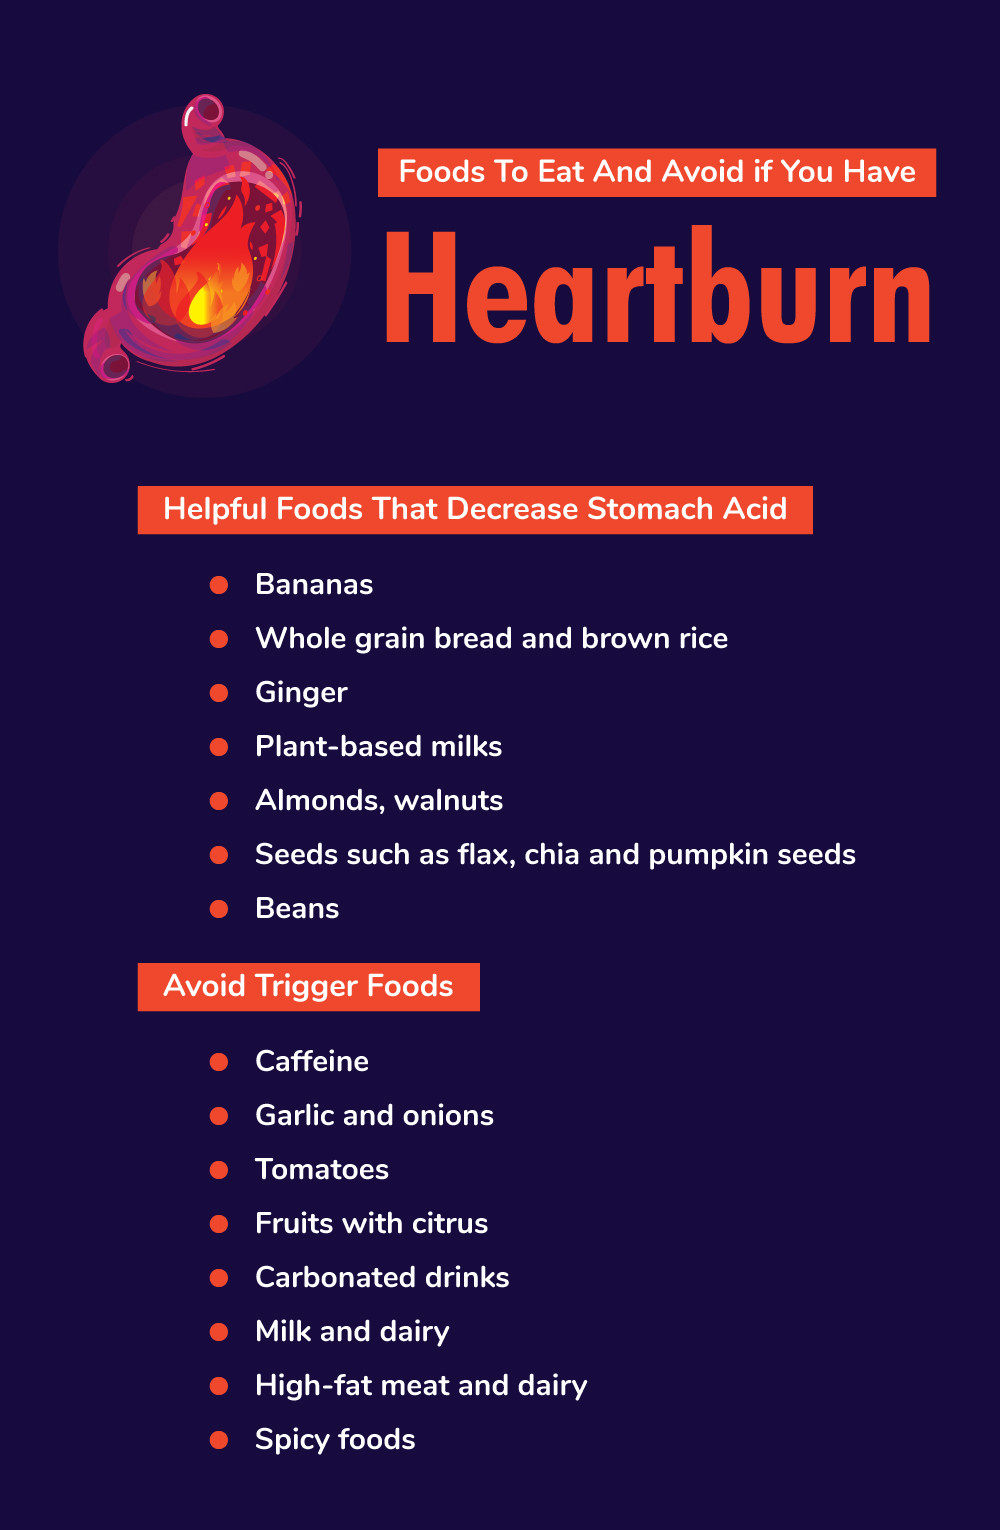 Foods To Eat And Avoid if You Have Heartburn